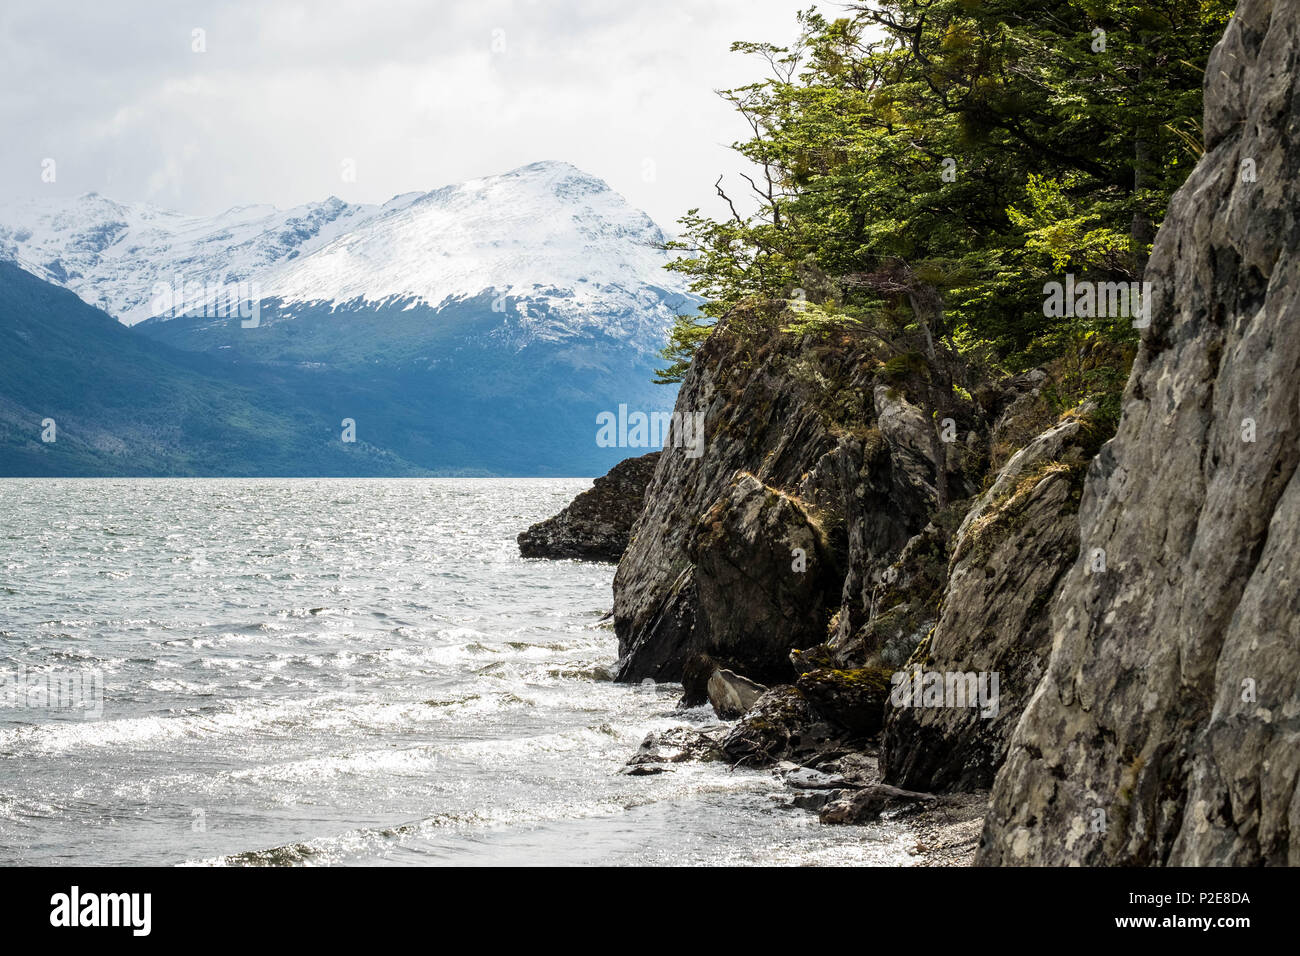 A cliff borders Lake Acigami in the national park of Tierra del Fuego, mountains are on the other side. This lake connects Argentina and Chile. Stock Photo